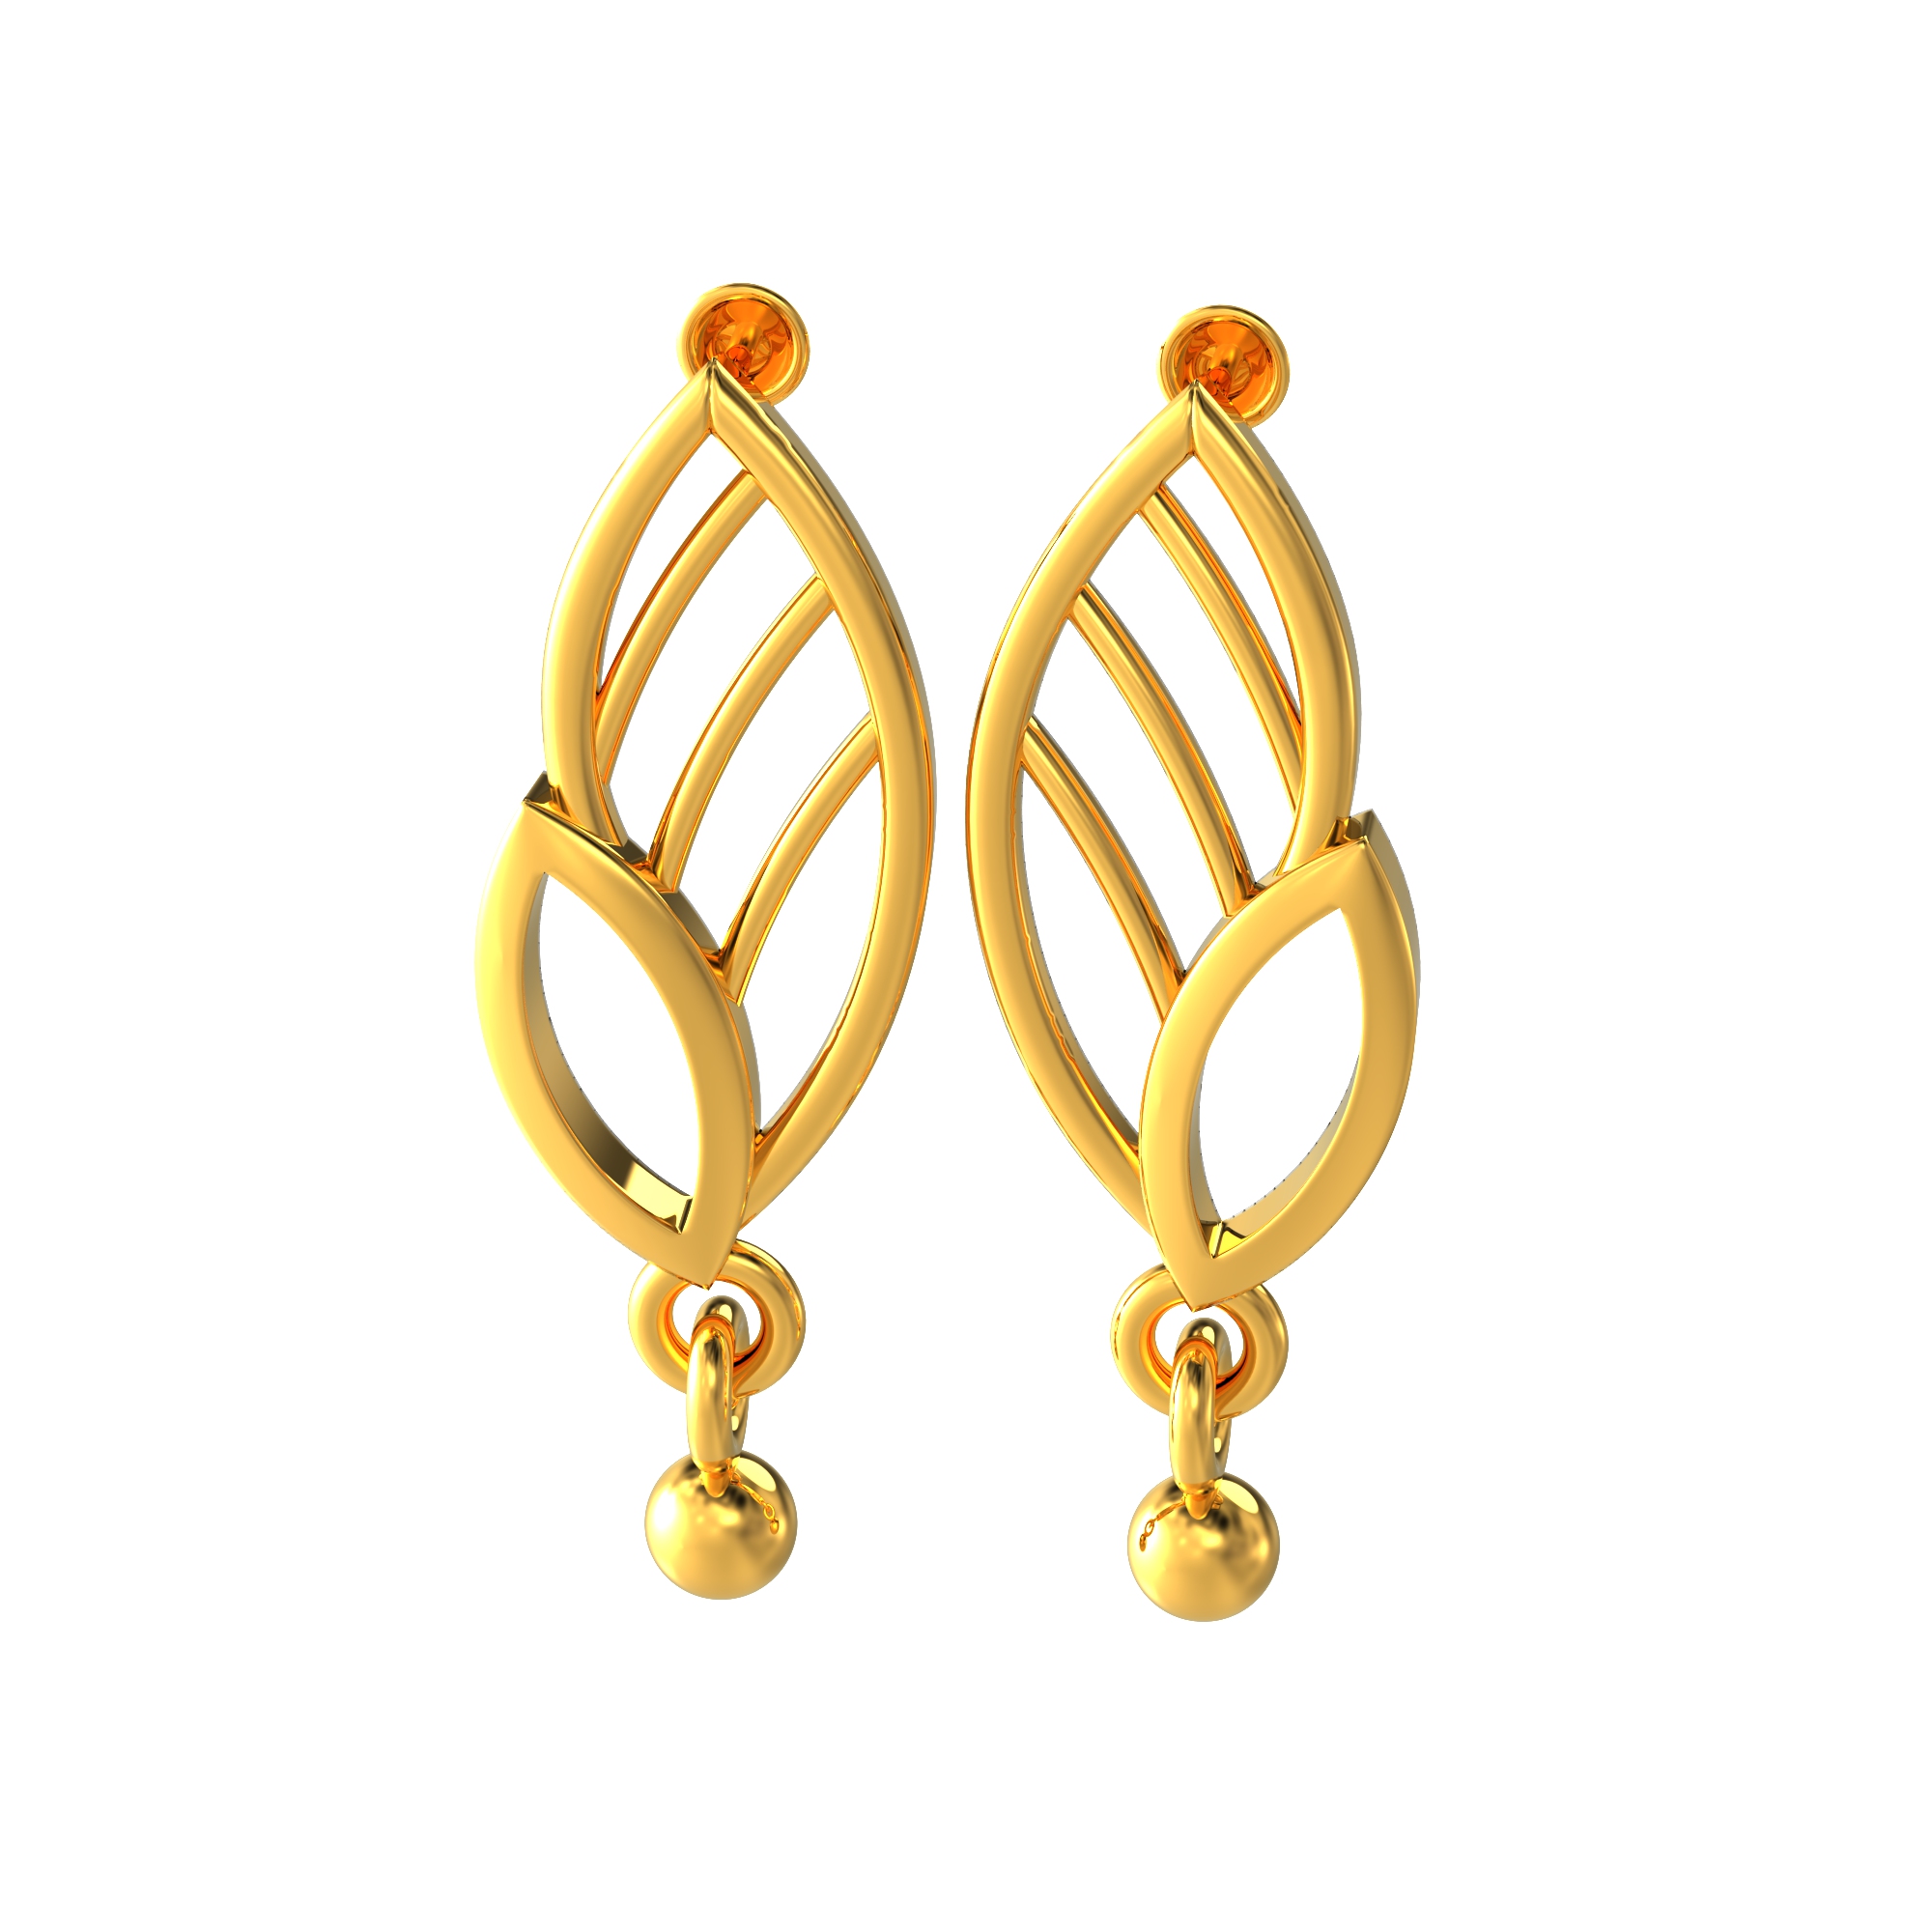 55 Beautiful Gold jhumka earring designs  Tips on Jhumka shopping  Bling  Sparkle